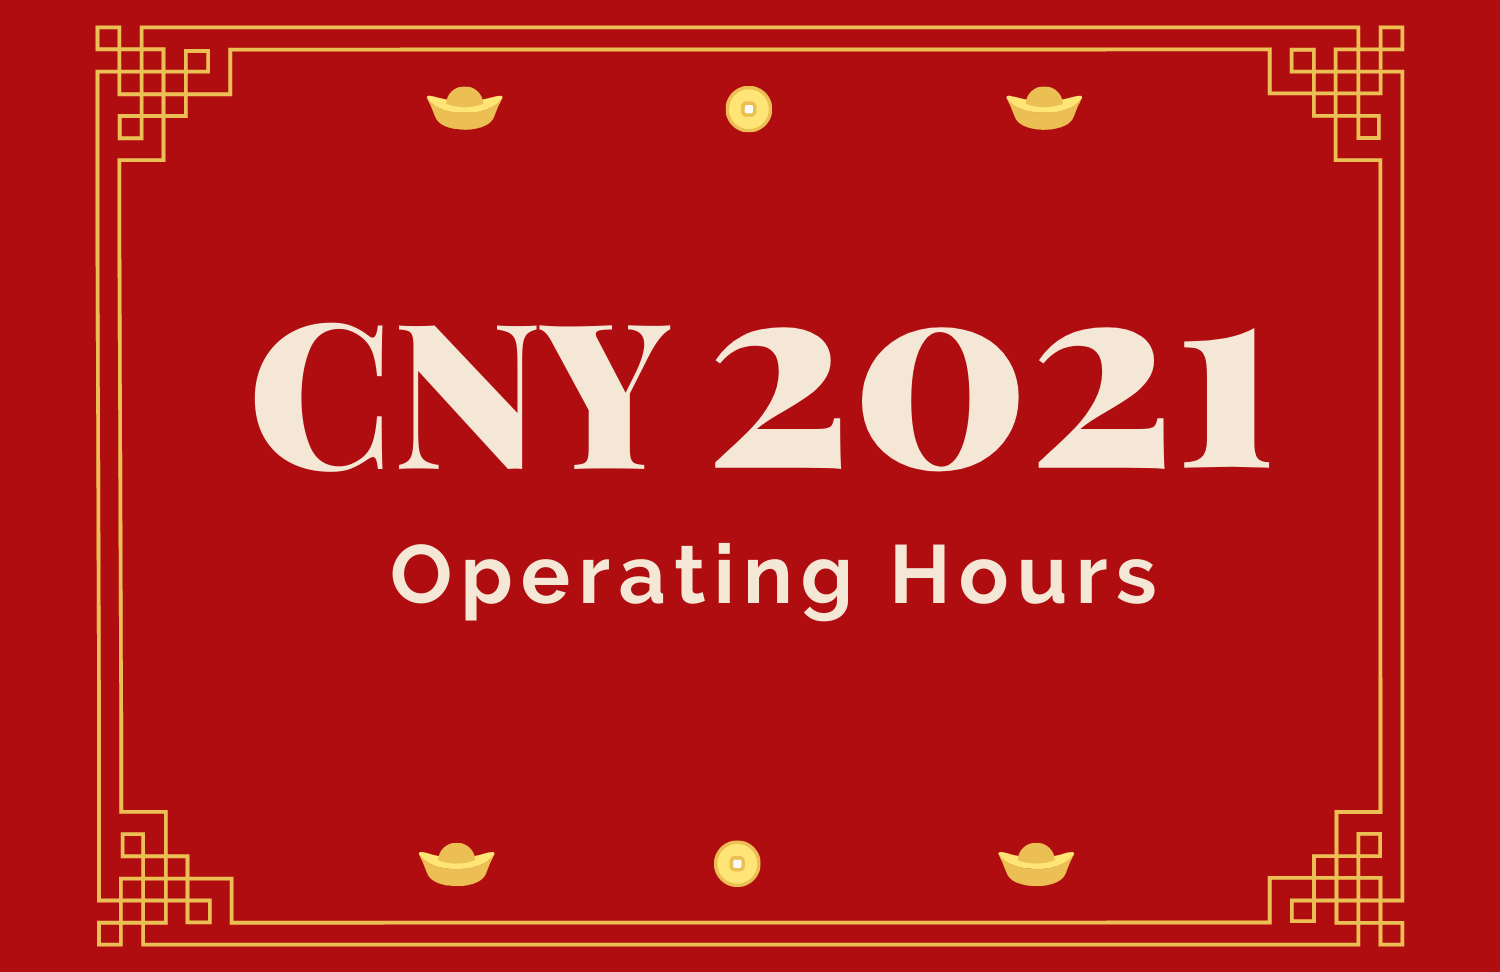 CNY 2021 Operating Hours